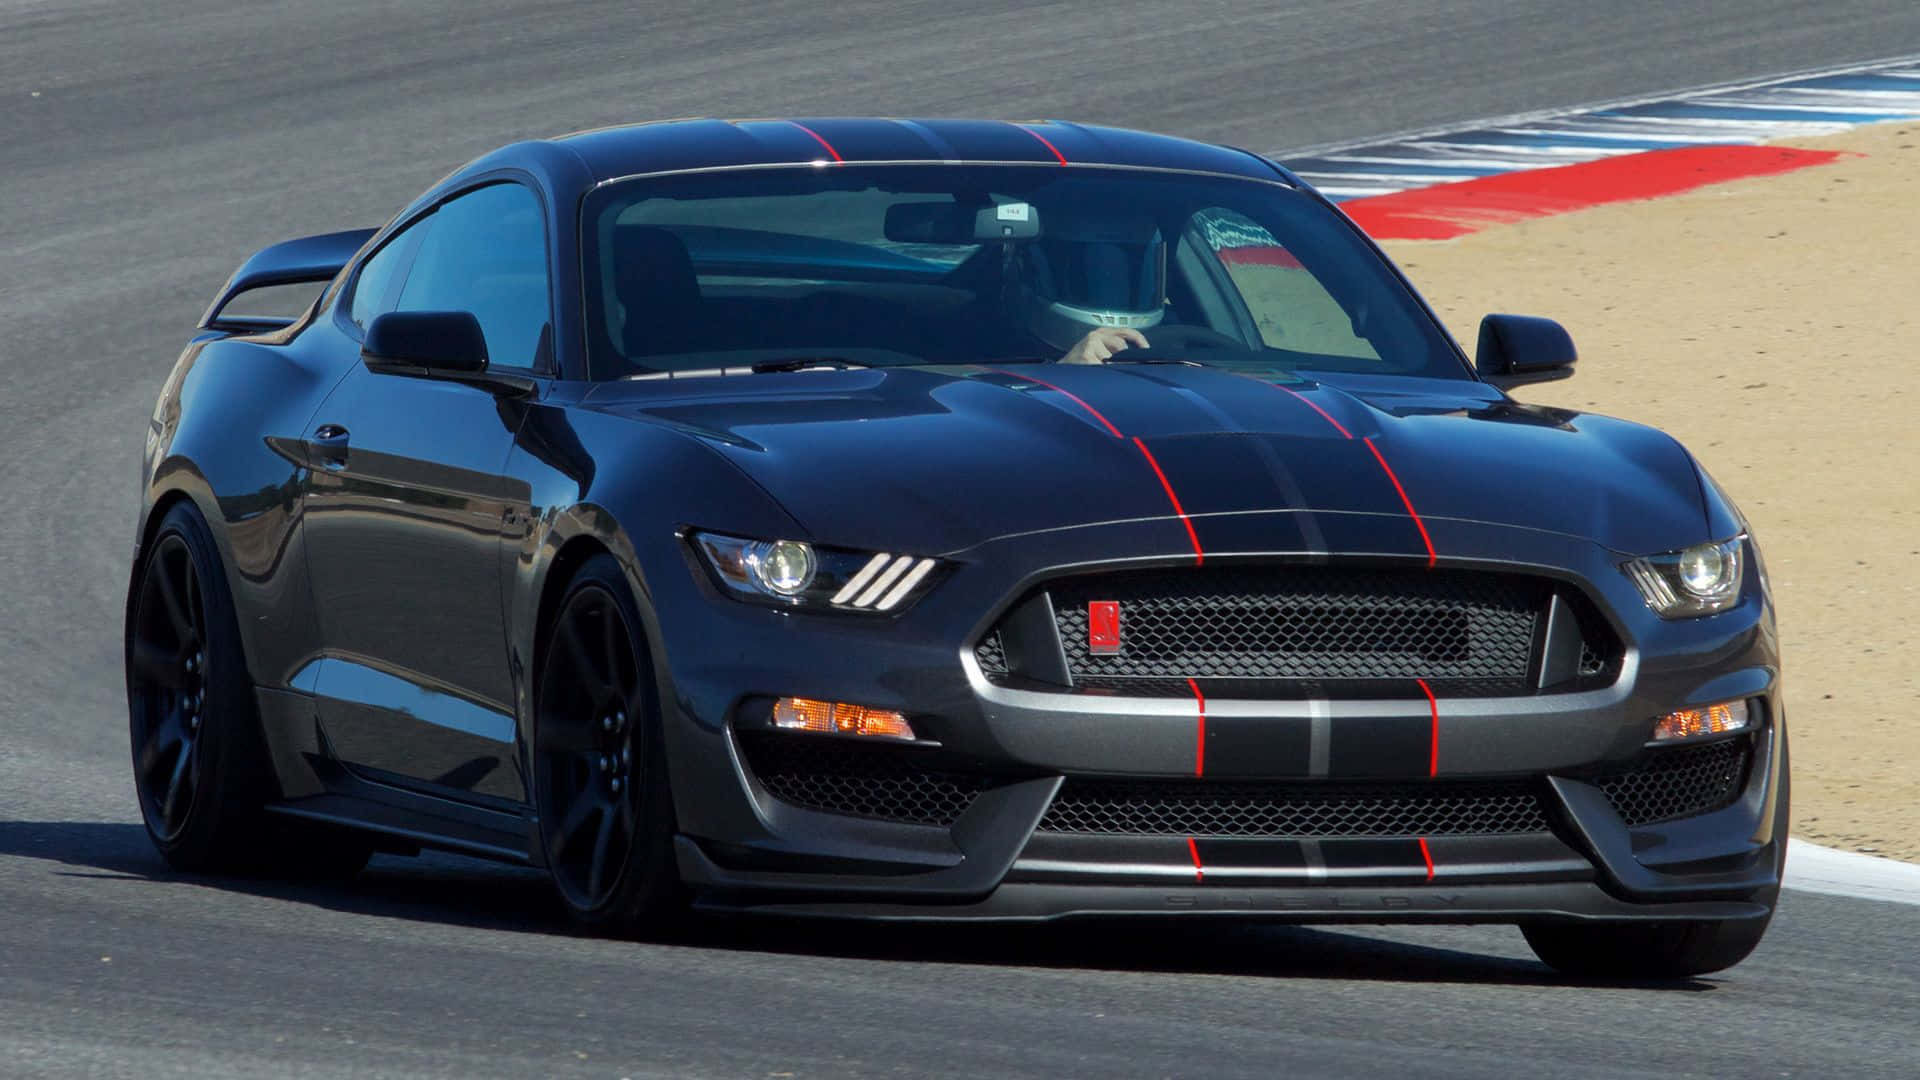 Ford Mustang Shelby GT350 in Action Wallpaper